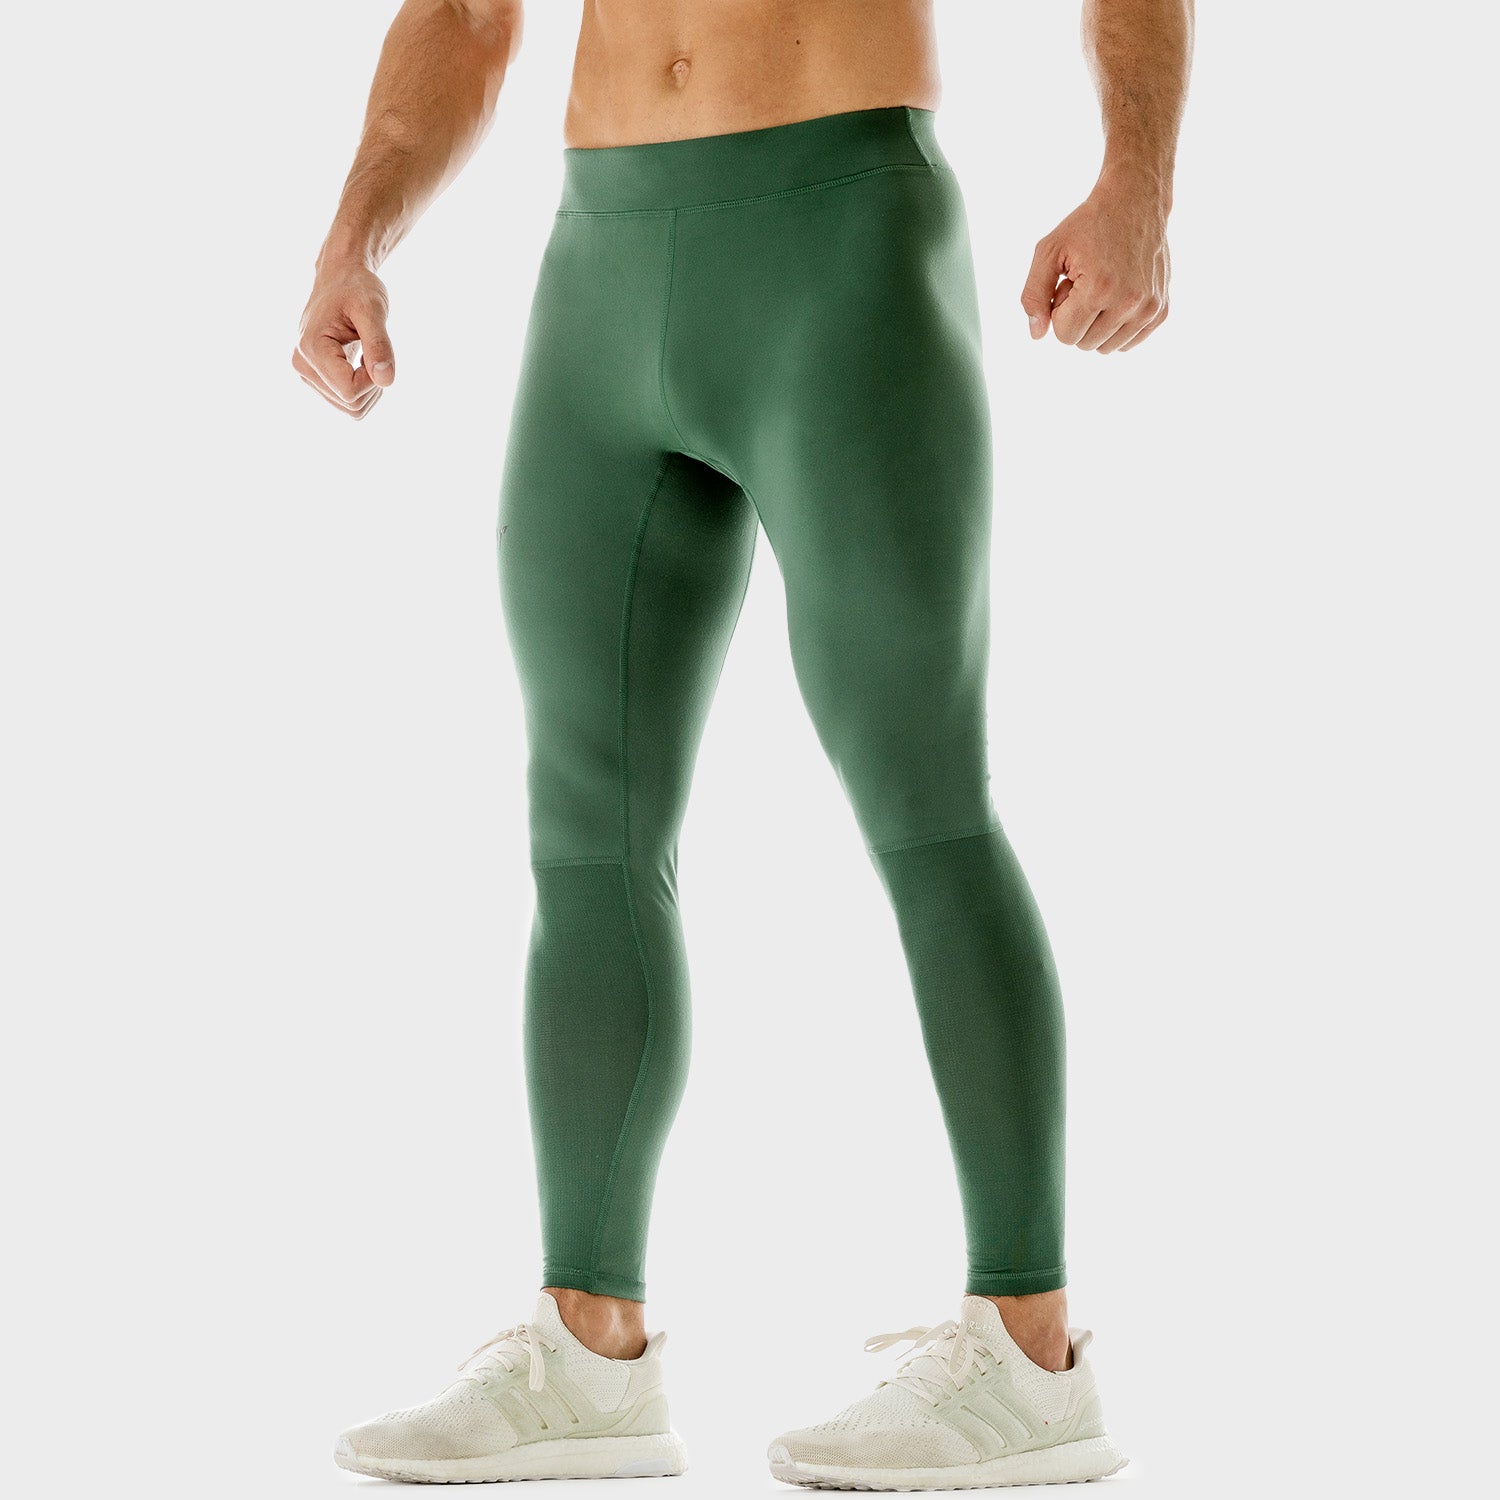 squatwolf-gym-leggings-for-men-360-performance-tights-garden-topiary-workout-clothes